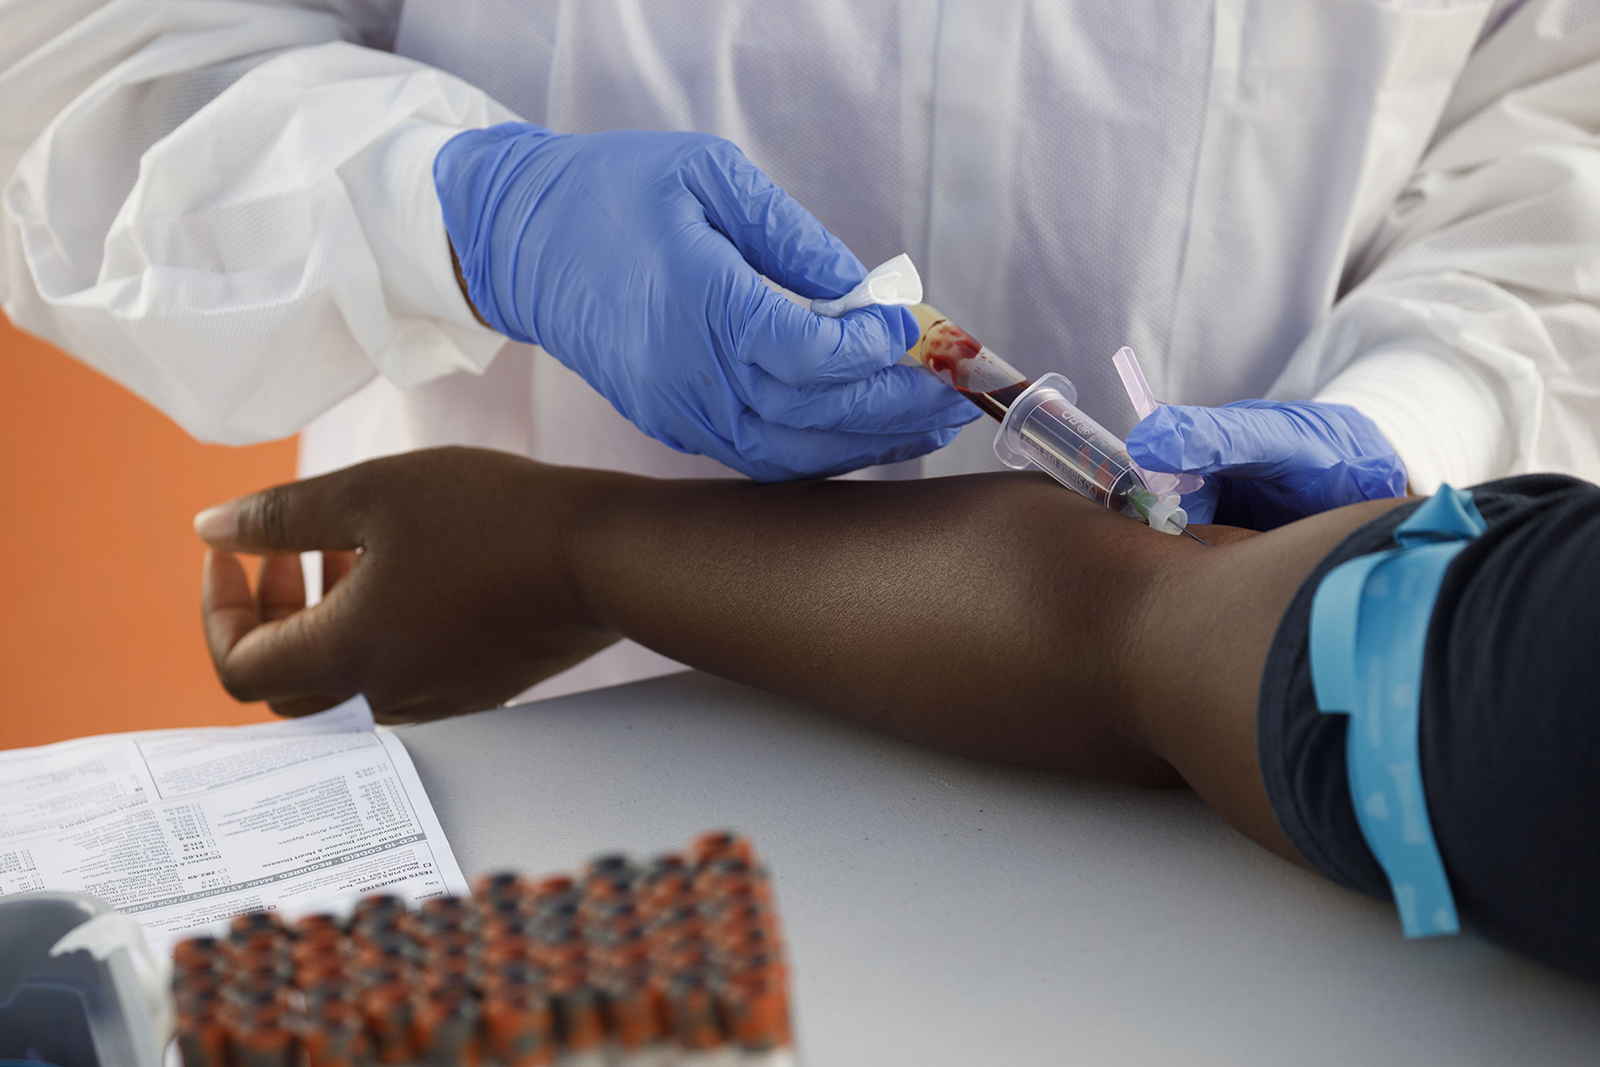 A phlebotomist wearing protective gloves draws blood from a patient for a Covid-19 antibody test at a GUARDaHEART Foundation testing site in Los Angeles, California, on August 5.